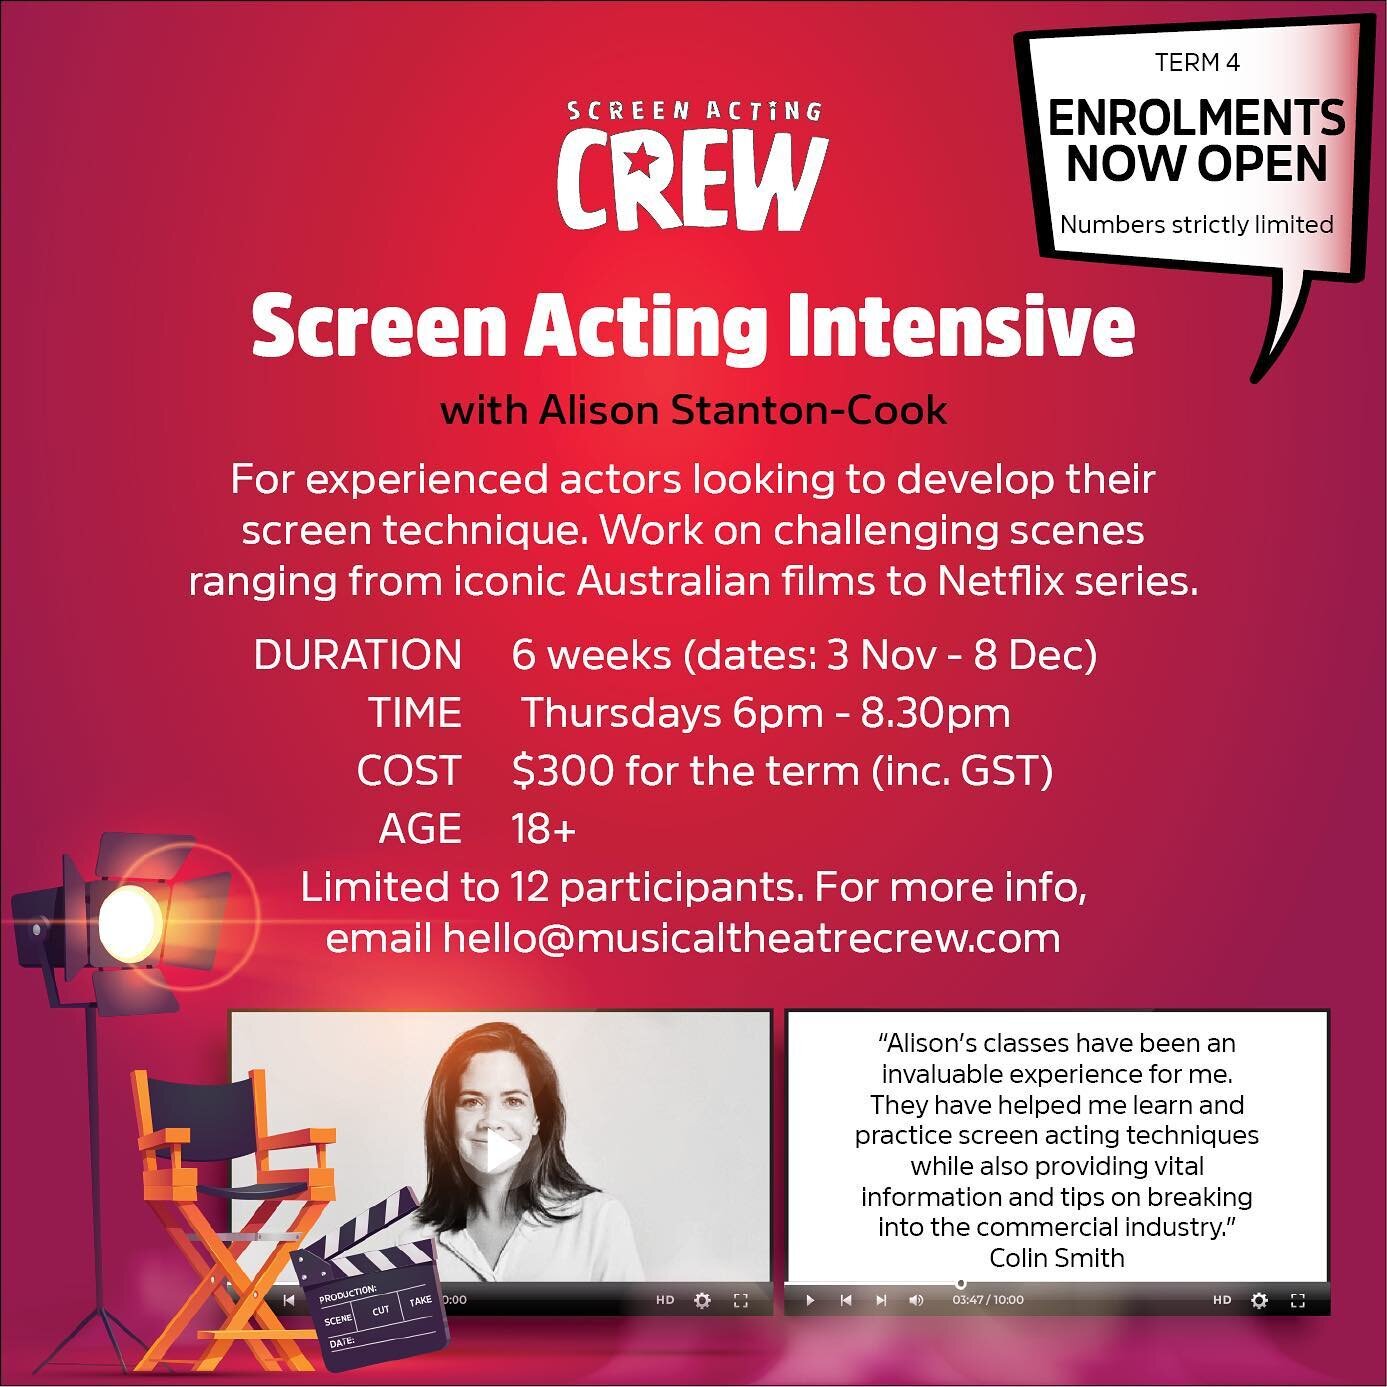 Screen Acting Intensive 6-week program with Alison Stanton-Cook 🎬
For more info, email hello@musicaltheatrecrew.com